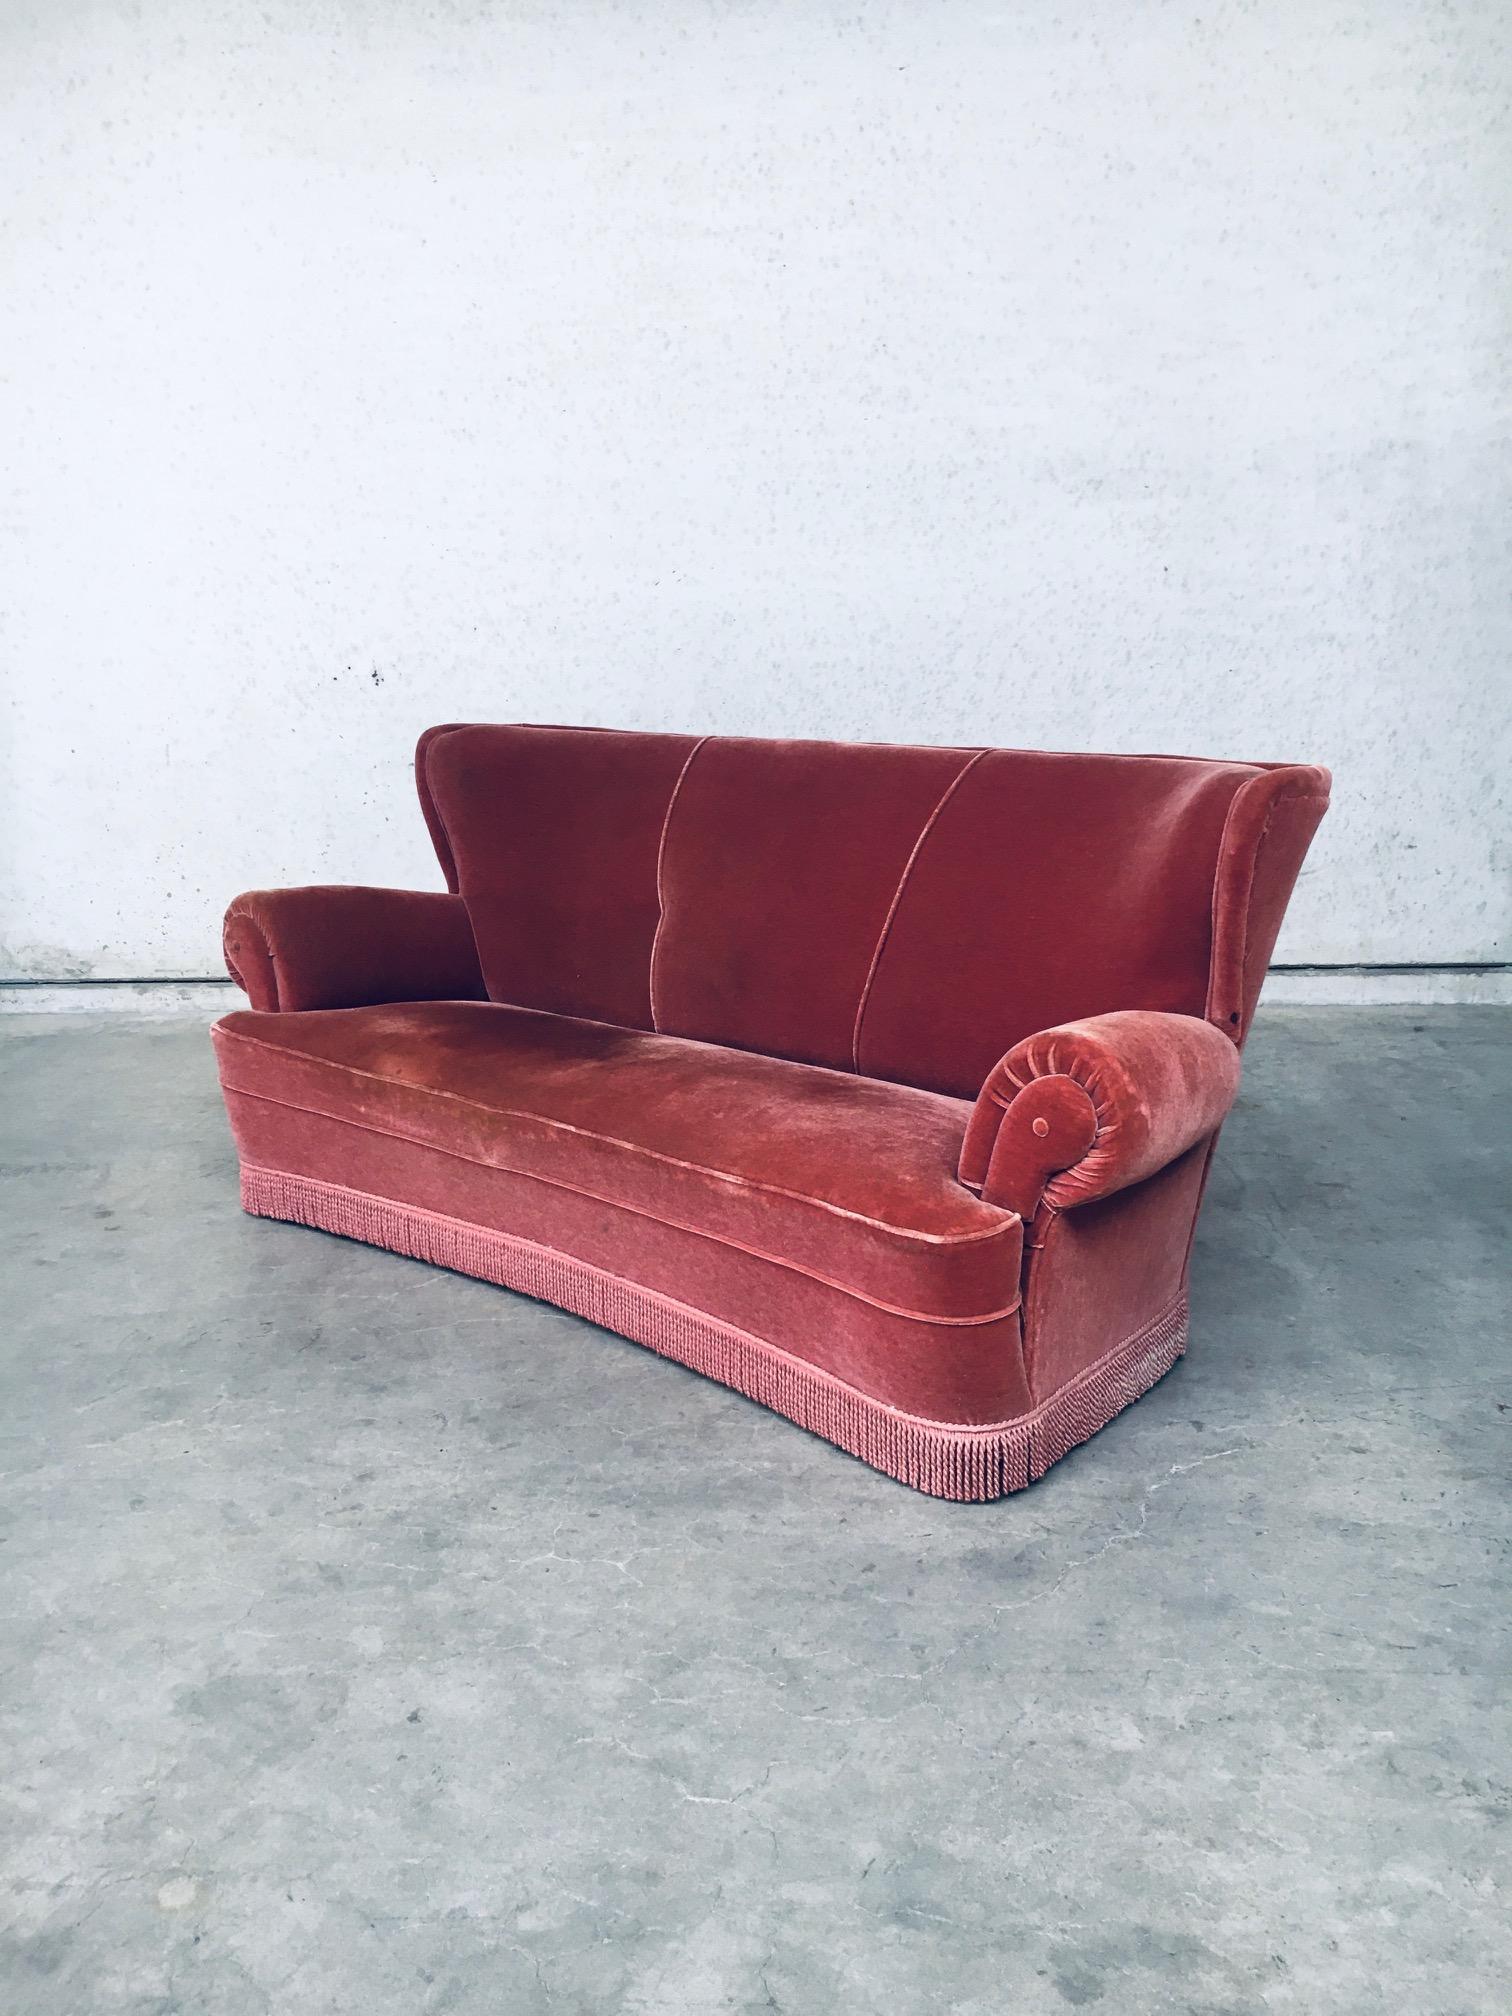 Vintage Art Deco design pink velvet 3 seat sofa with fringe. Made in Italy, 1930's / 40's. Curved large lucious pink velvet three seat sofa with fringed bottom. Spring cushion seating on oak wooden frame. All original very good condition, with minor